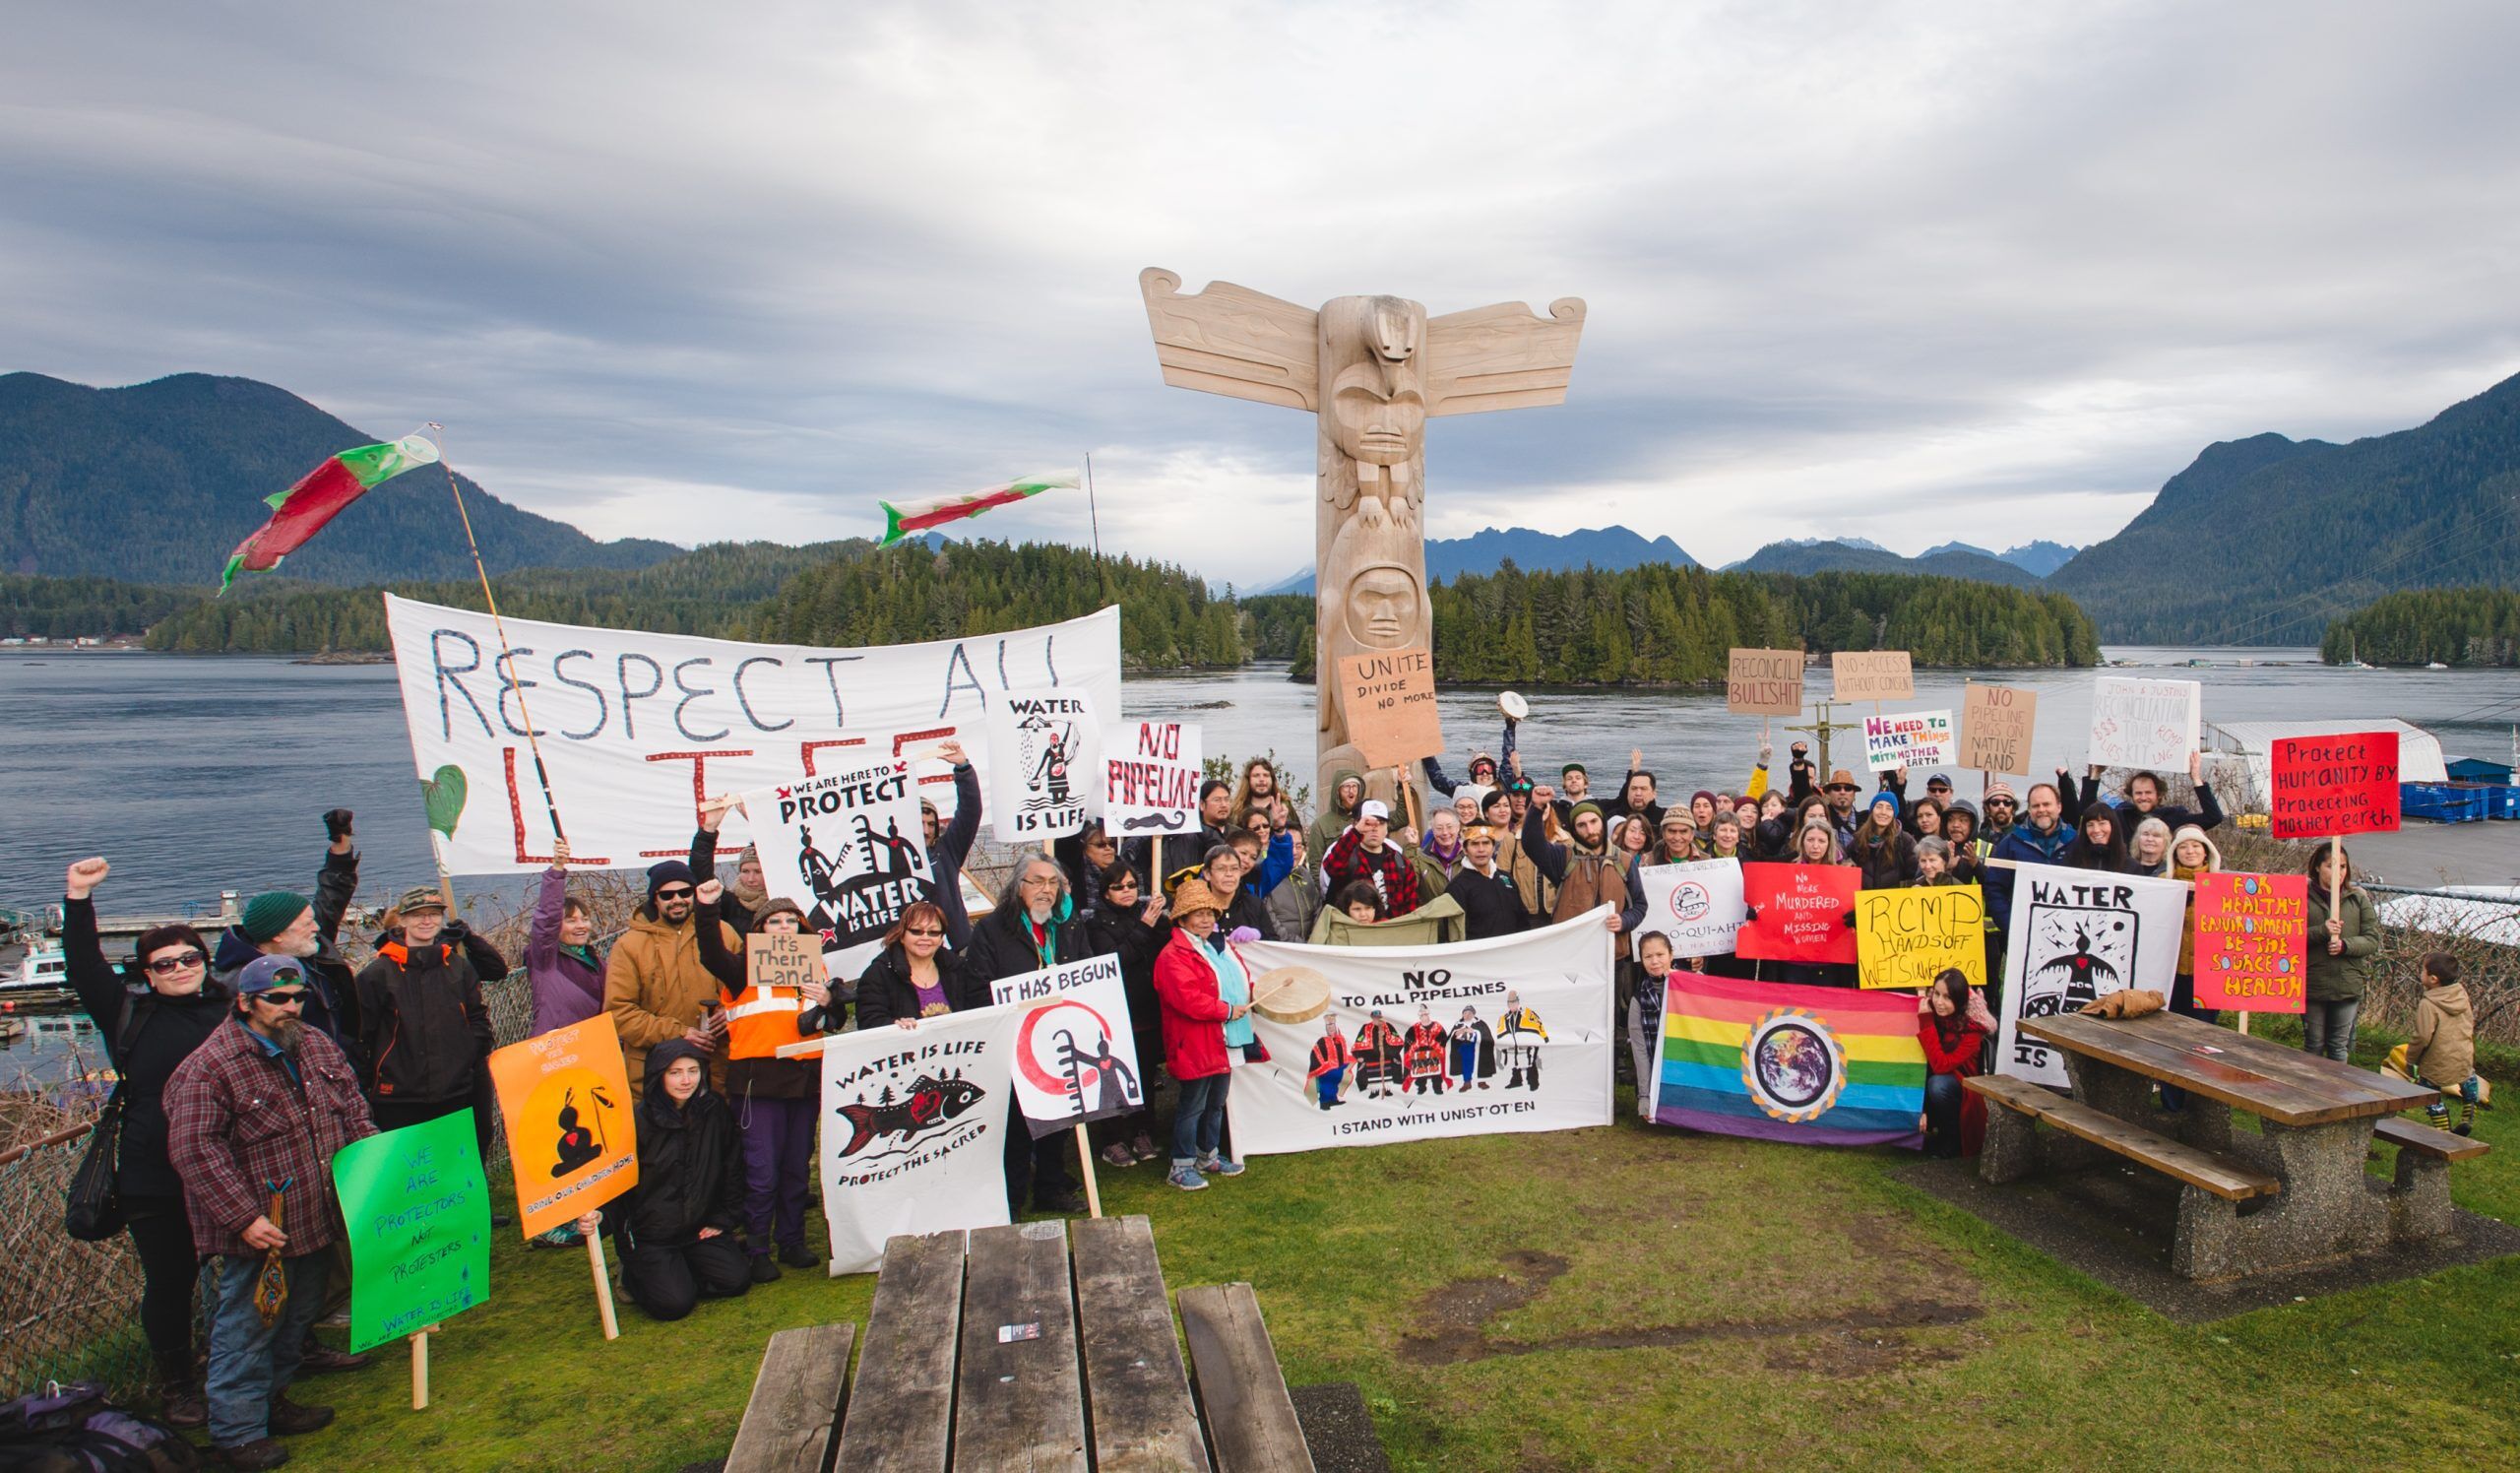 Last winter in Tofino, Tla-o-qui-aht First Nation led a march and rally in solidarity with the Wet’suwet’en Nation in saying “No To All Pipelines”. - Photo by Marnie Recker